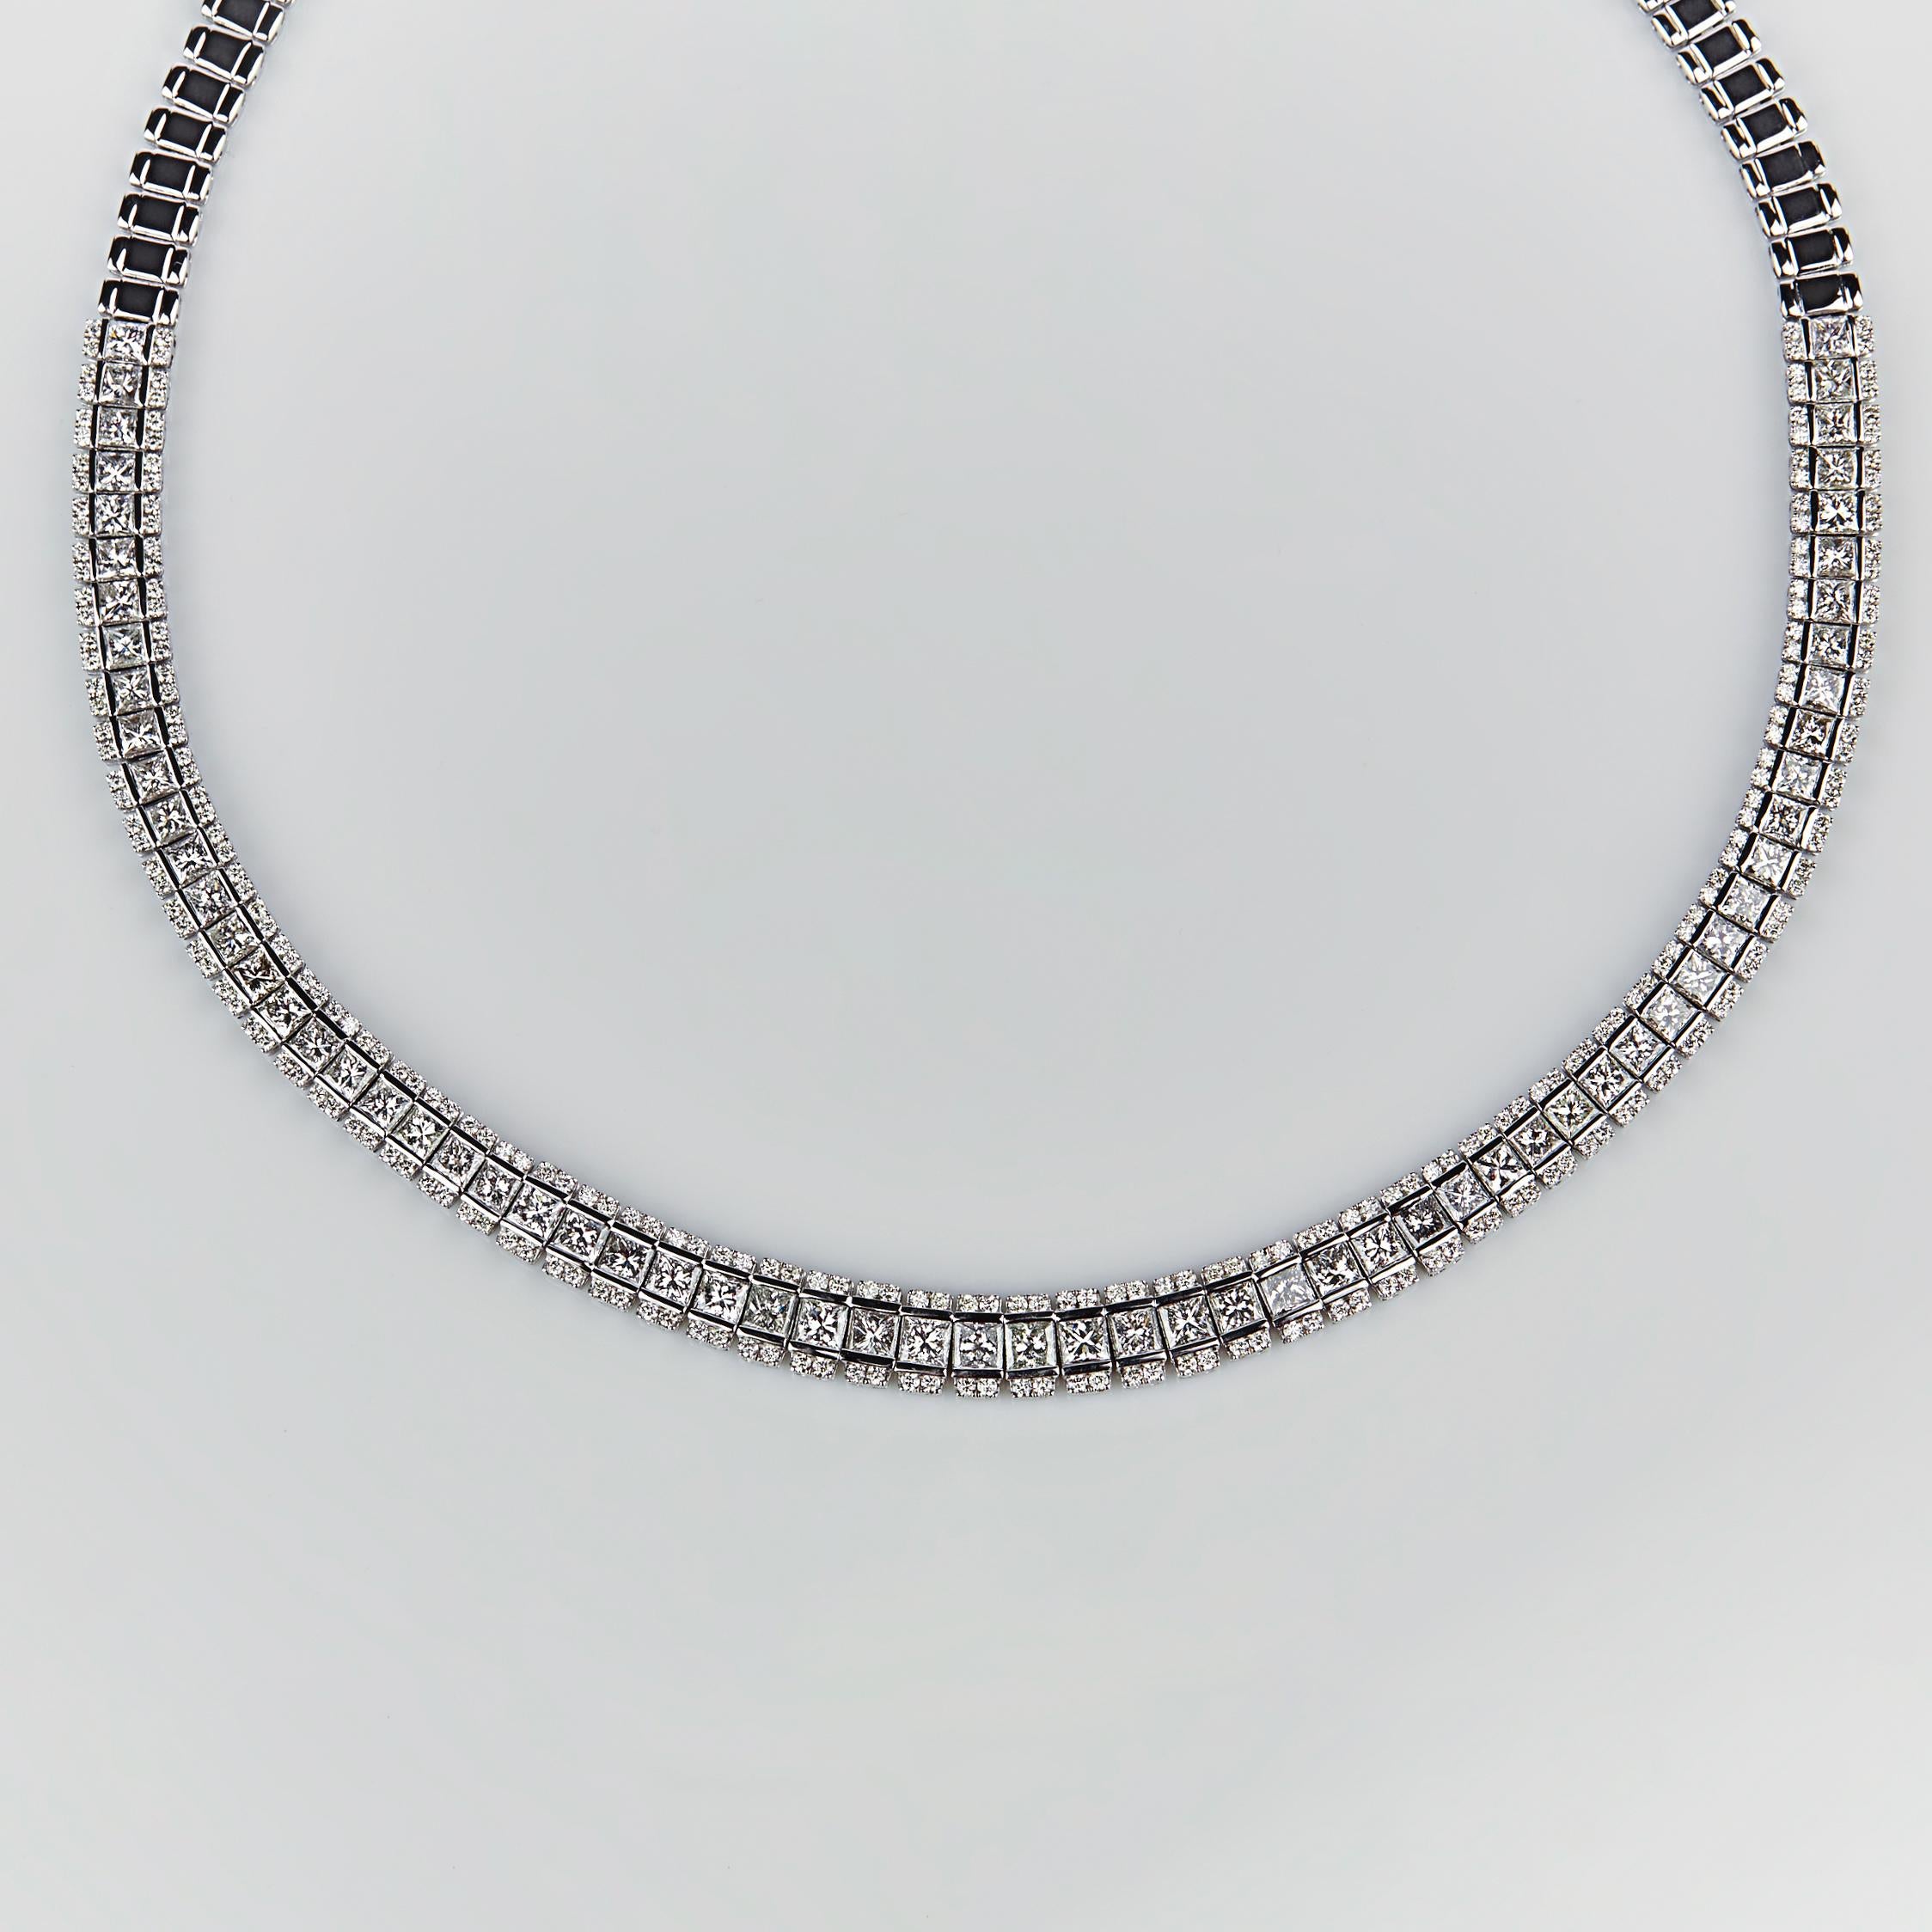 An elegant Diamond Necklace set in 55.08 grams of 18K White Gold and studded using 325 diamonds totally weighing 14.67 carats in SI-GH clarity and color. 18 inches of sheer beauty and royalty crafted and linked by the hands of only the most